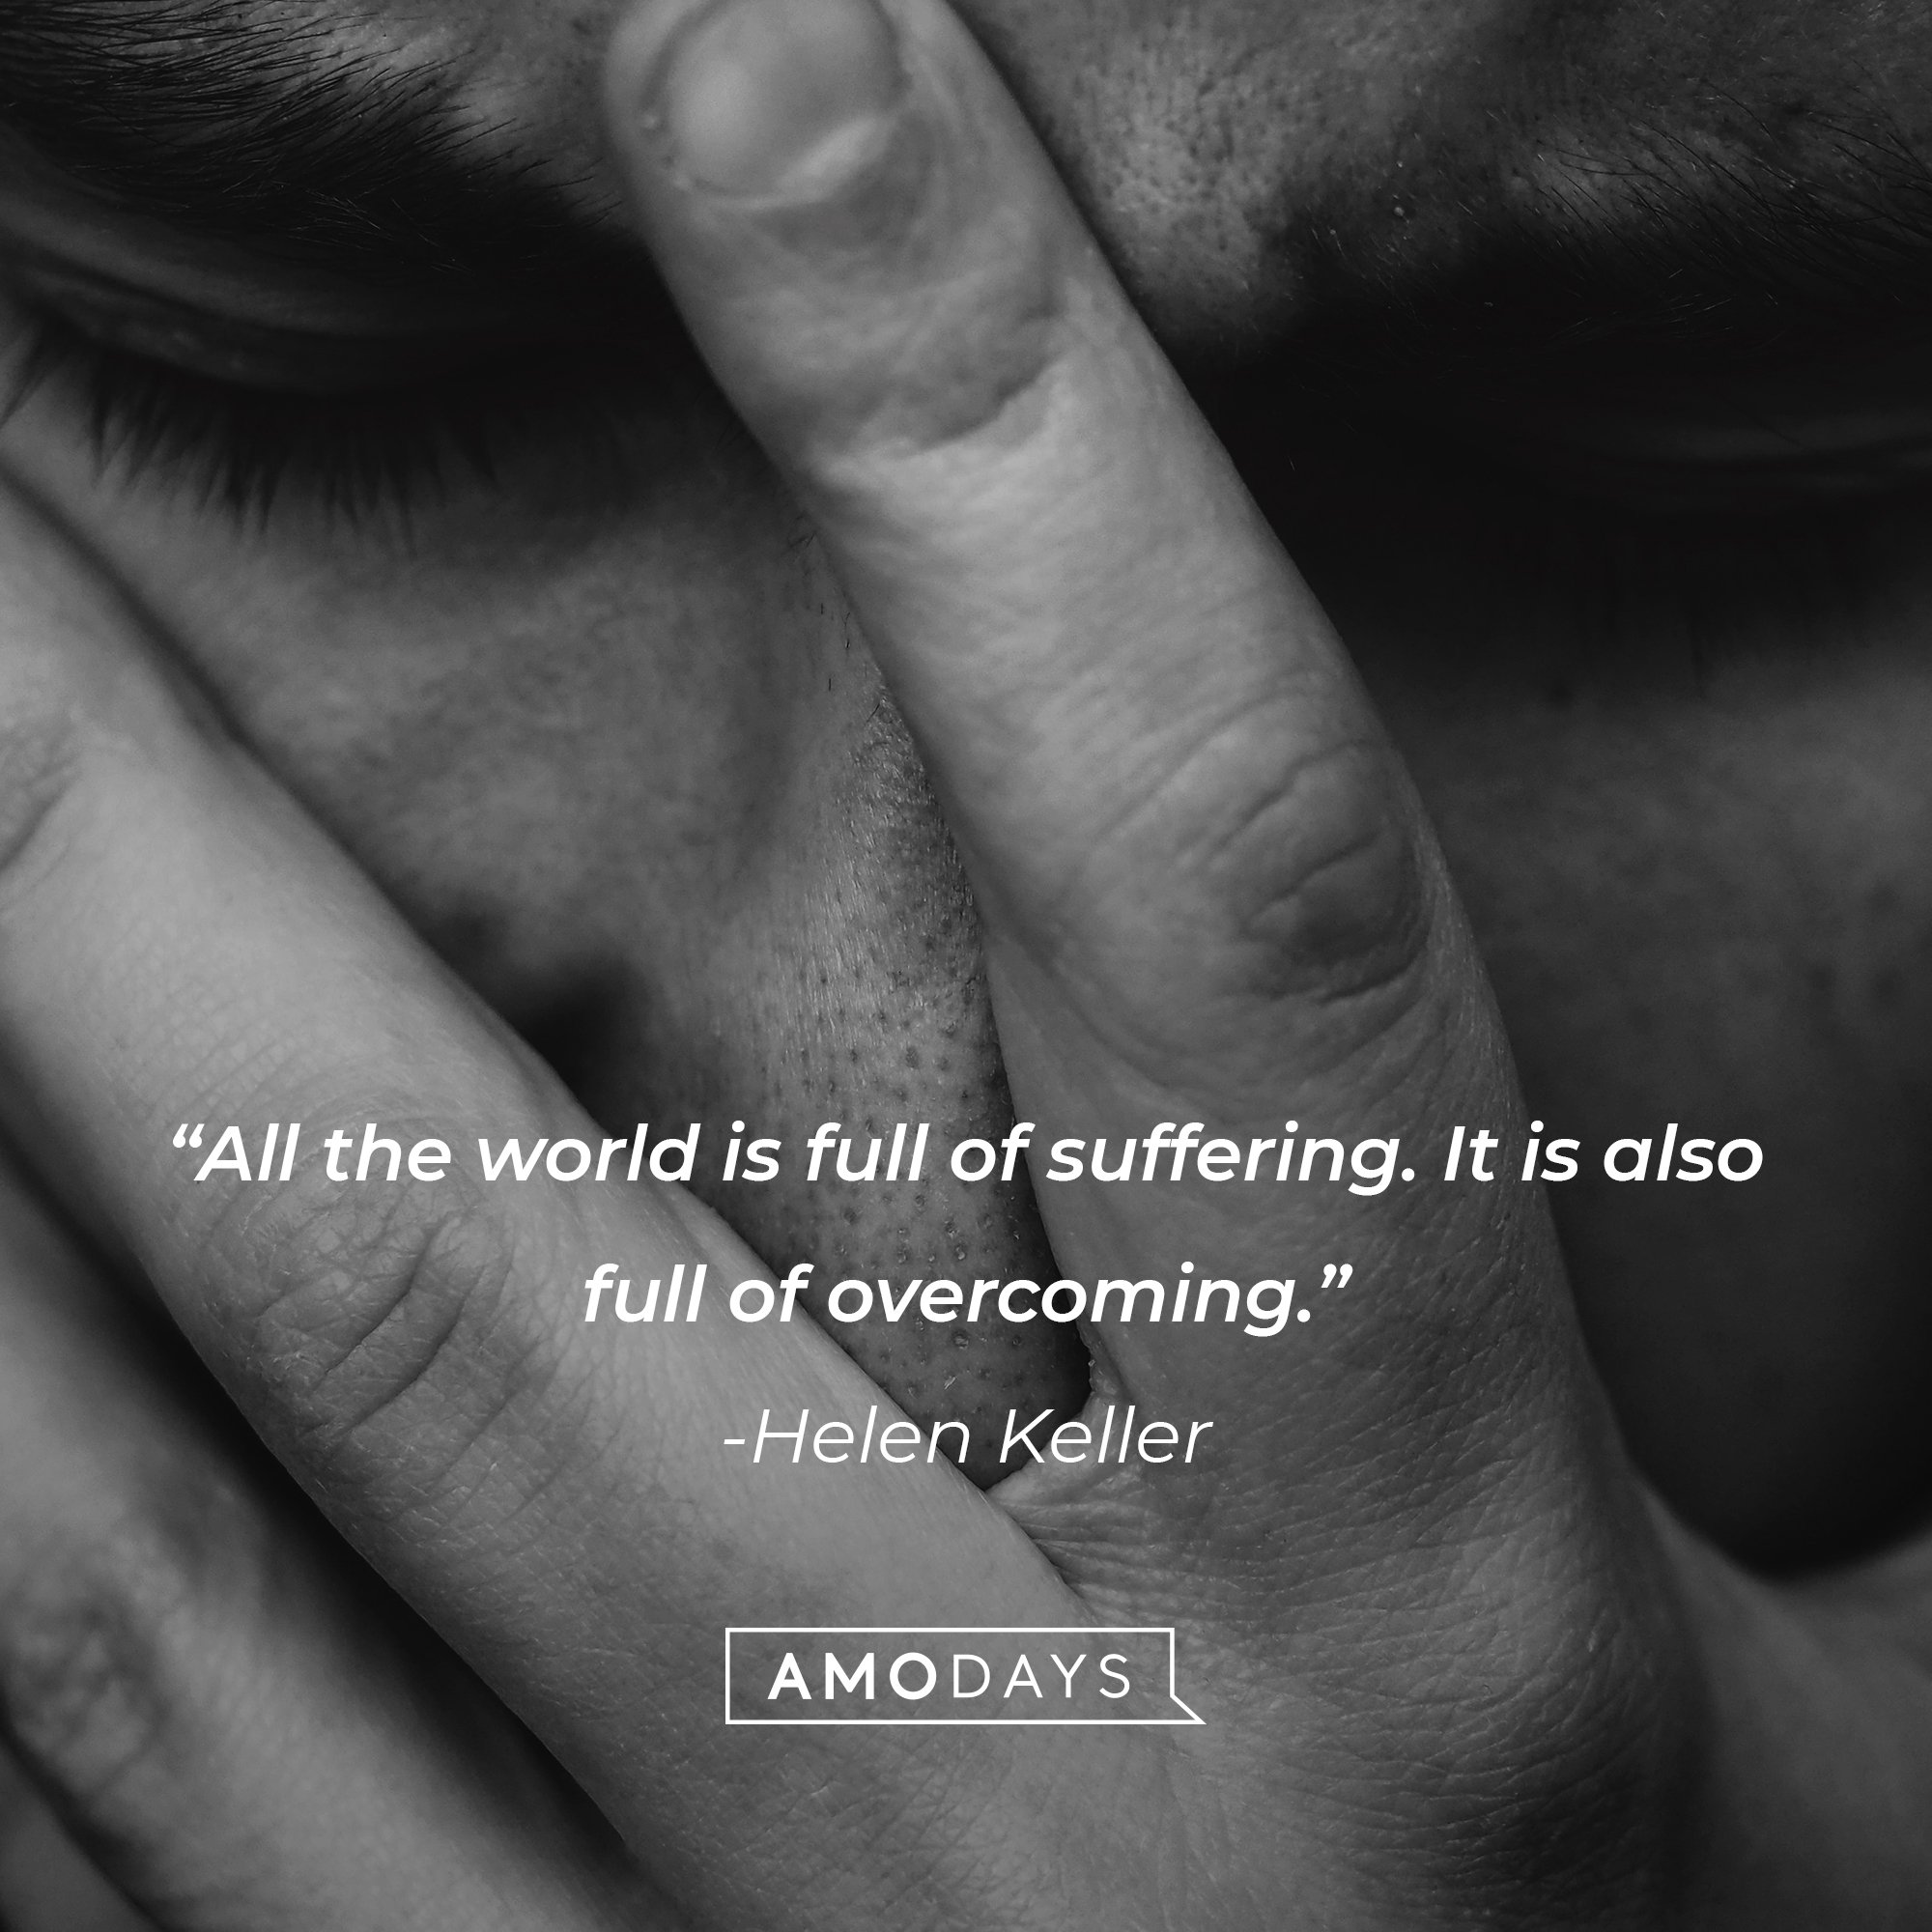 Helen Keller's quote: "All the world is full of suffering. It is also full of overcoming." | Image: AmoDays